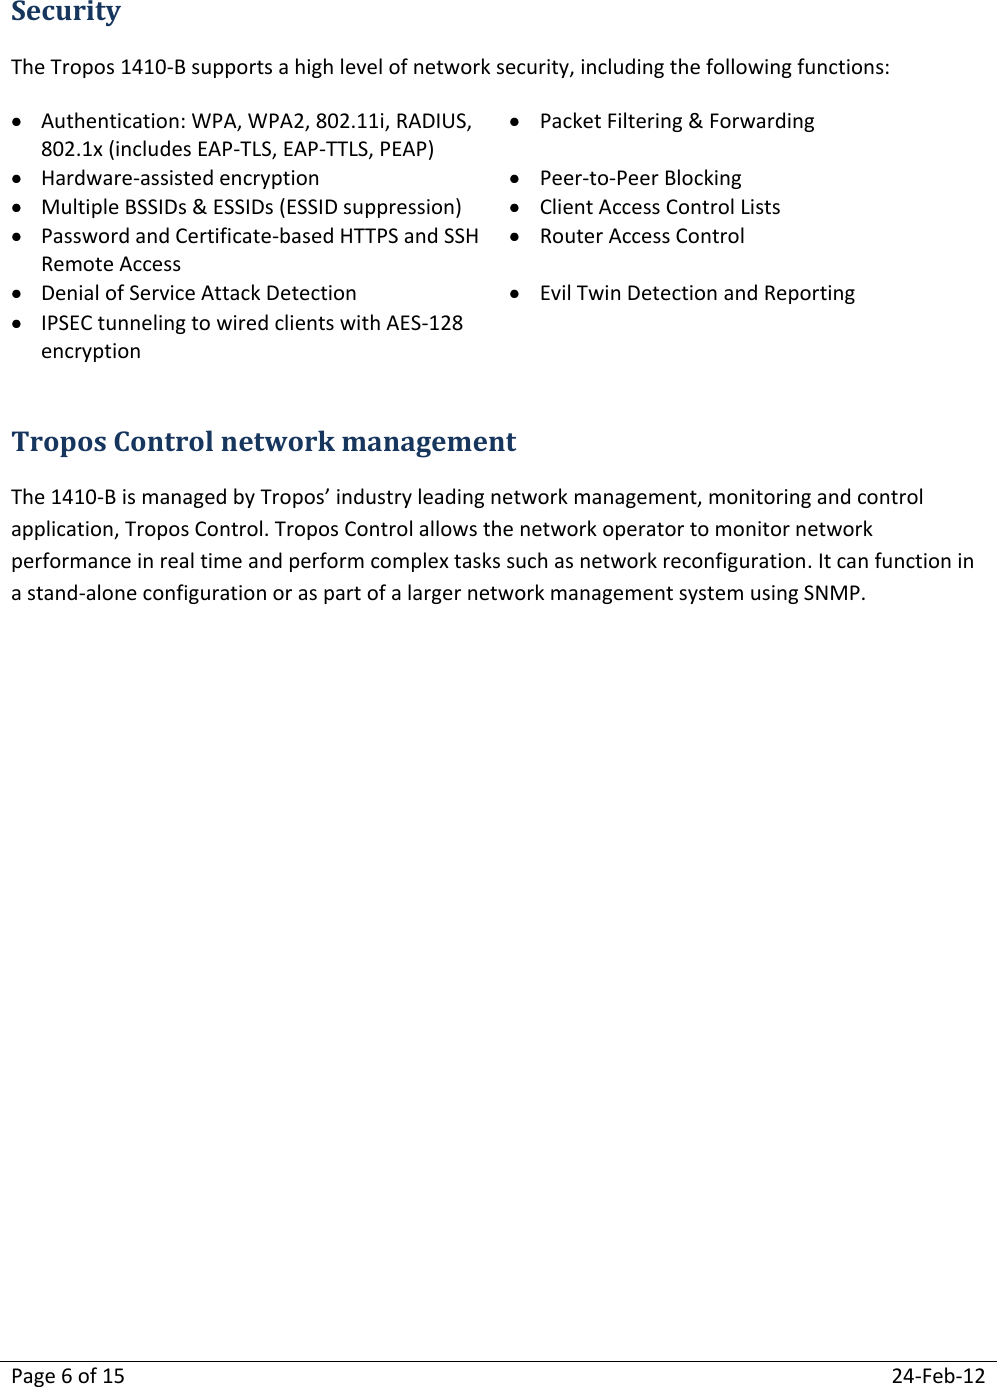 Page 6 of 15  24-Feb-12  Security The Tropos 1410-B supports a high level of network security, including the following functions:  Authentication: WPA, WPA2, 802.11i, RADIUS, 802.1x (includes EAP-TLS, EAP-TTLS, PEAP)  Packet Filtering &amp; Forwarding  Hardware-assisted encryption  Peer-to-Peer Blocking  Multiple BSSIDs &amp; ESSIDs (ESSID suppression)  Client Access Control Lists  Password and Certificate-based HTTPS and SSH Remote Access  Router Access Control  Denial of Service Attack Detection  Evil Twin Detection and Reporting  IPSEC tunneling to wired clients with AES-128 encryption   Tropos Control network management The 1410-B is managed by Tropos’ industry leading network management, monitoring and control application, Tropos Control. Tropos Control allows the network operator to monitor network performance in real time and perform complex tasks such as network reconfiguration. It can function in a stand-alone configuration or as part of a larger network management system using SNMP.   